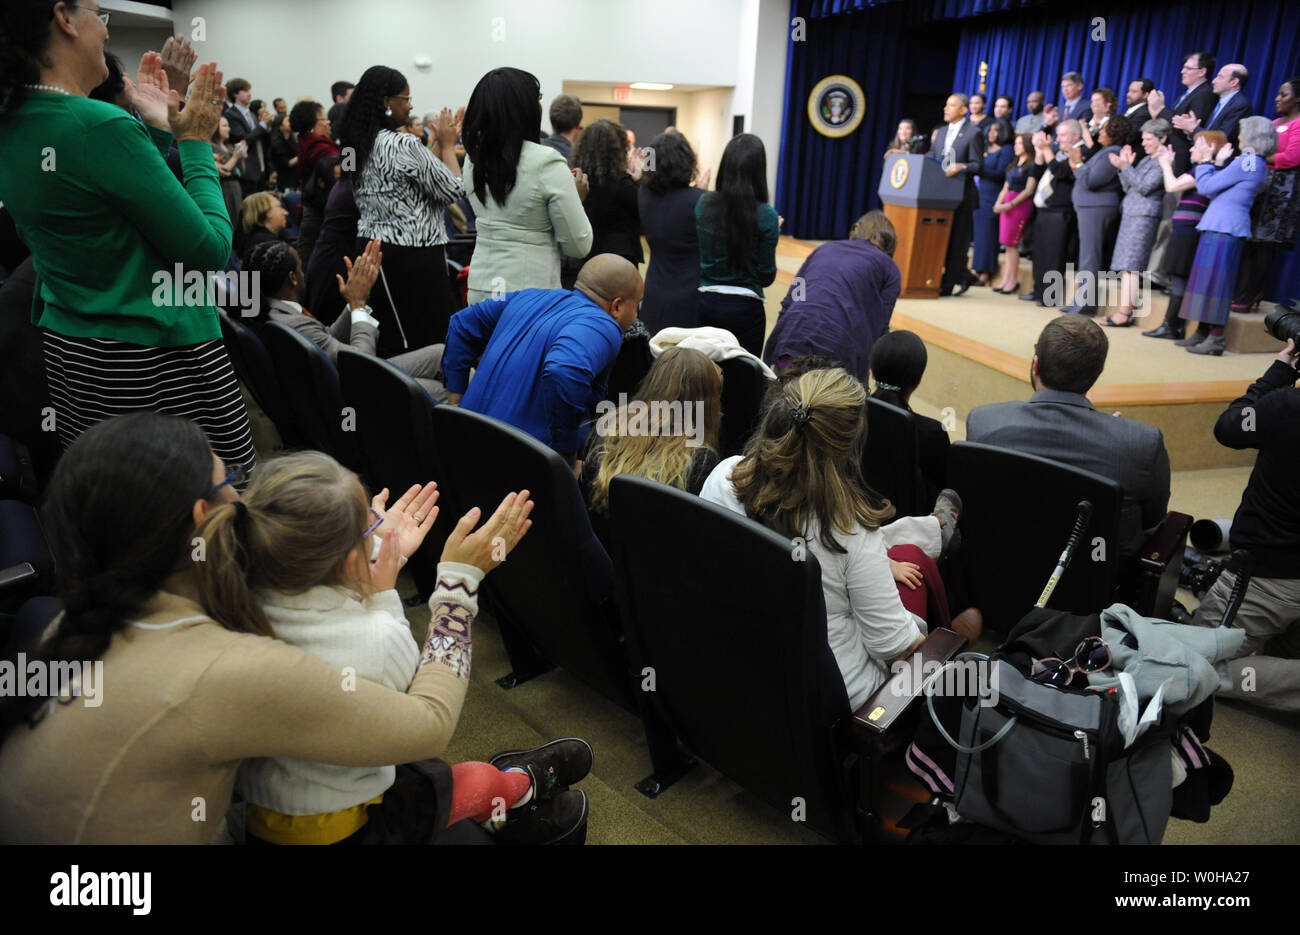 Hope Katz-Zogby, age 3, applauds with her mother Elizabeth (L) as they listen to U.S. President Barack Obama discuss the successes of the Affordable Care Act in the Eisenhower Executive Office Building in Washington, DC on December 3, 2013.   Hope, from Baltimore, Maryland, has Down Syndrome but is guaranteed health insurance under the ACA, since insurance companies cannot bar anyone with pre-existing medical conditions. Obama promised that his signature healthcare law was going to remain as long as he was president and that the troubled www.healthcare.gov website was working well for the vast Stock Photo